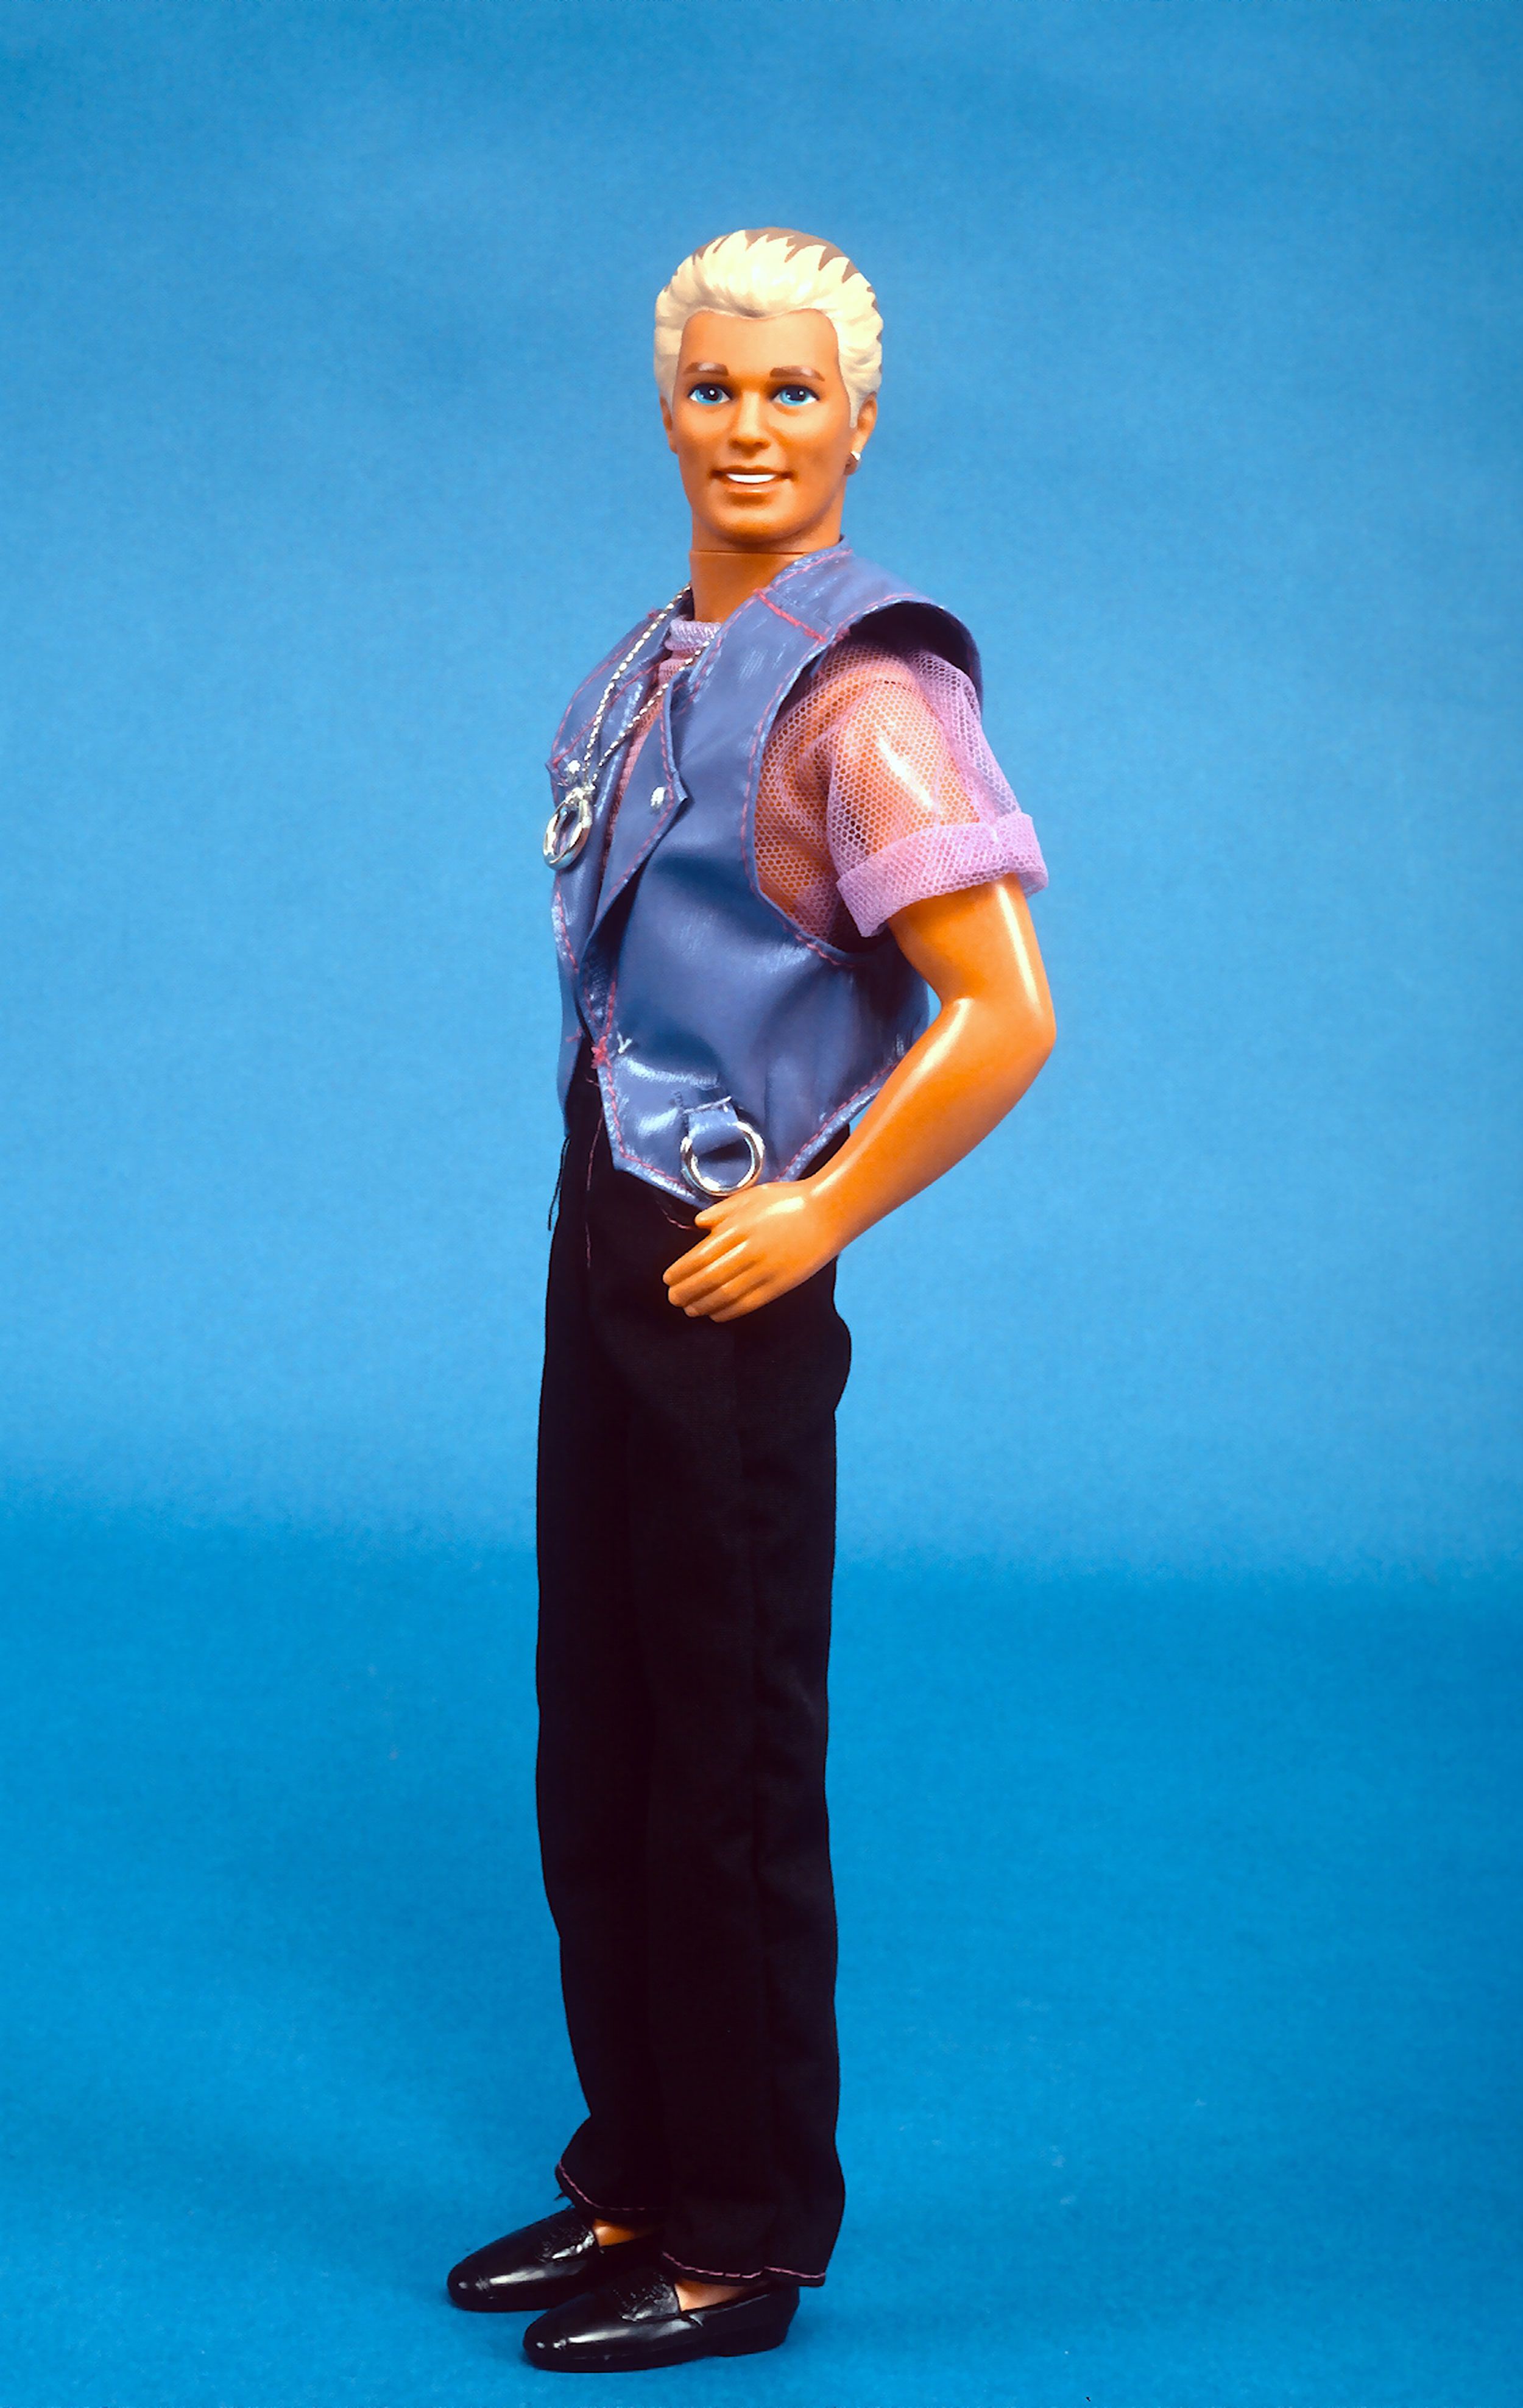 NEW YORK, NY - AUGUST 5: Earring Magic Ken, introduced by Mattel as a companion to its Earring Magic Barbie figure, is photographed August 5, 1993 in New York City. This stylish Ken doll features an updated look which includes blonde highlights in his traditionally brown hair, a purple shirt, lavender vest, a necklace with a circular charm and an earring in its left ear. (Photo by Yvonne Hemsey/Getty Images)